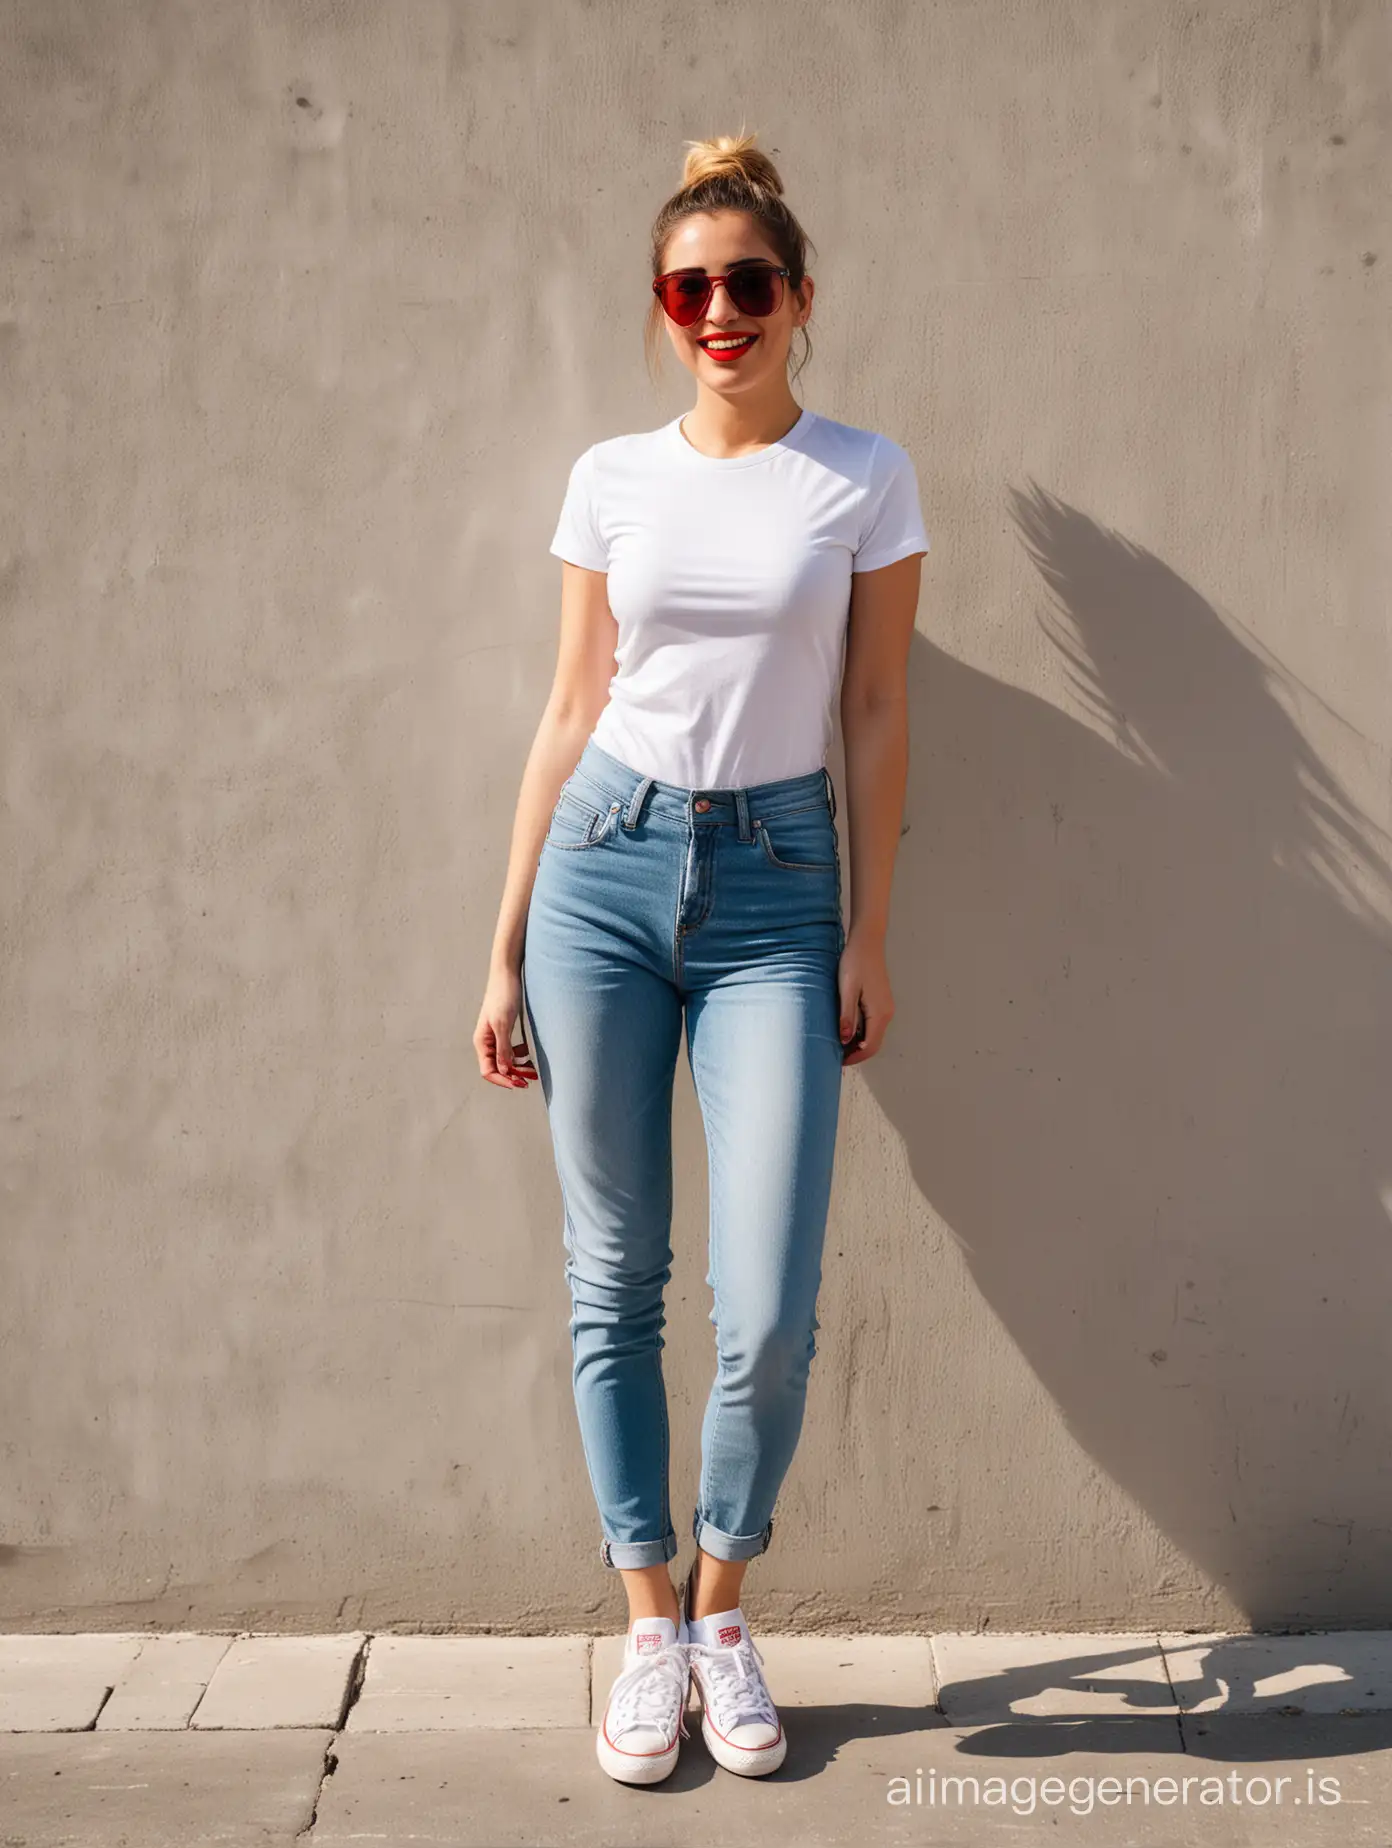 Iranian happy skinny woman 30 years old, white T-shirt, mom jeans, converse shoes, ponytail blonde hair, red lipsticks, red sunglasses, full-body shot, in front of a white street wall, dramatic lighting